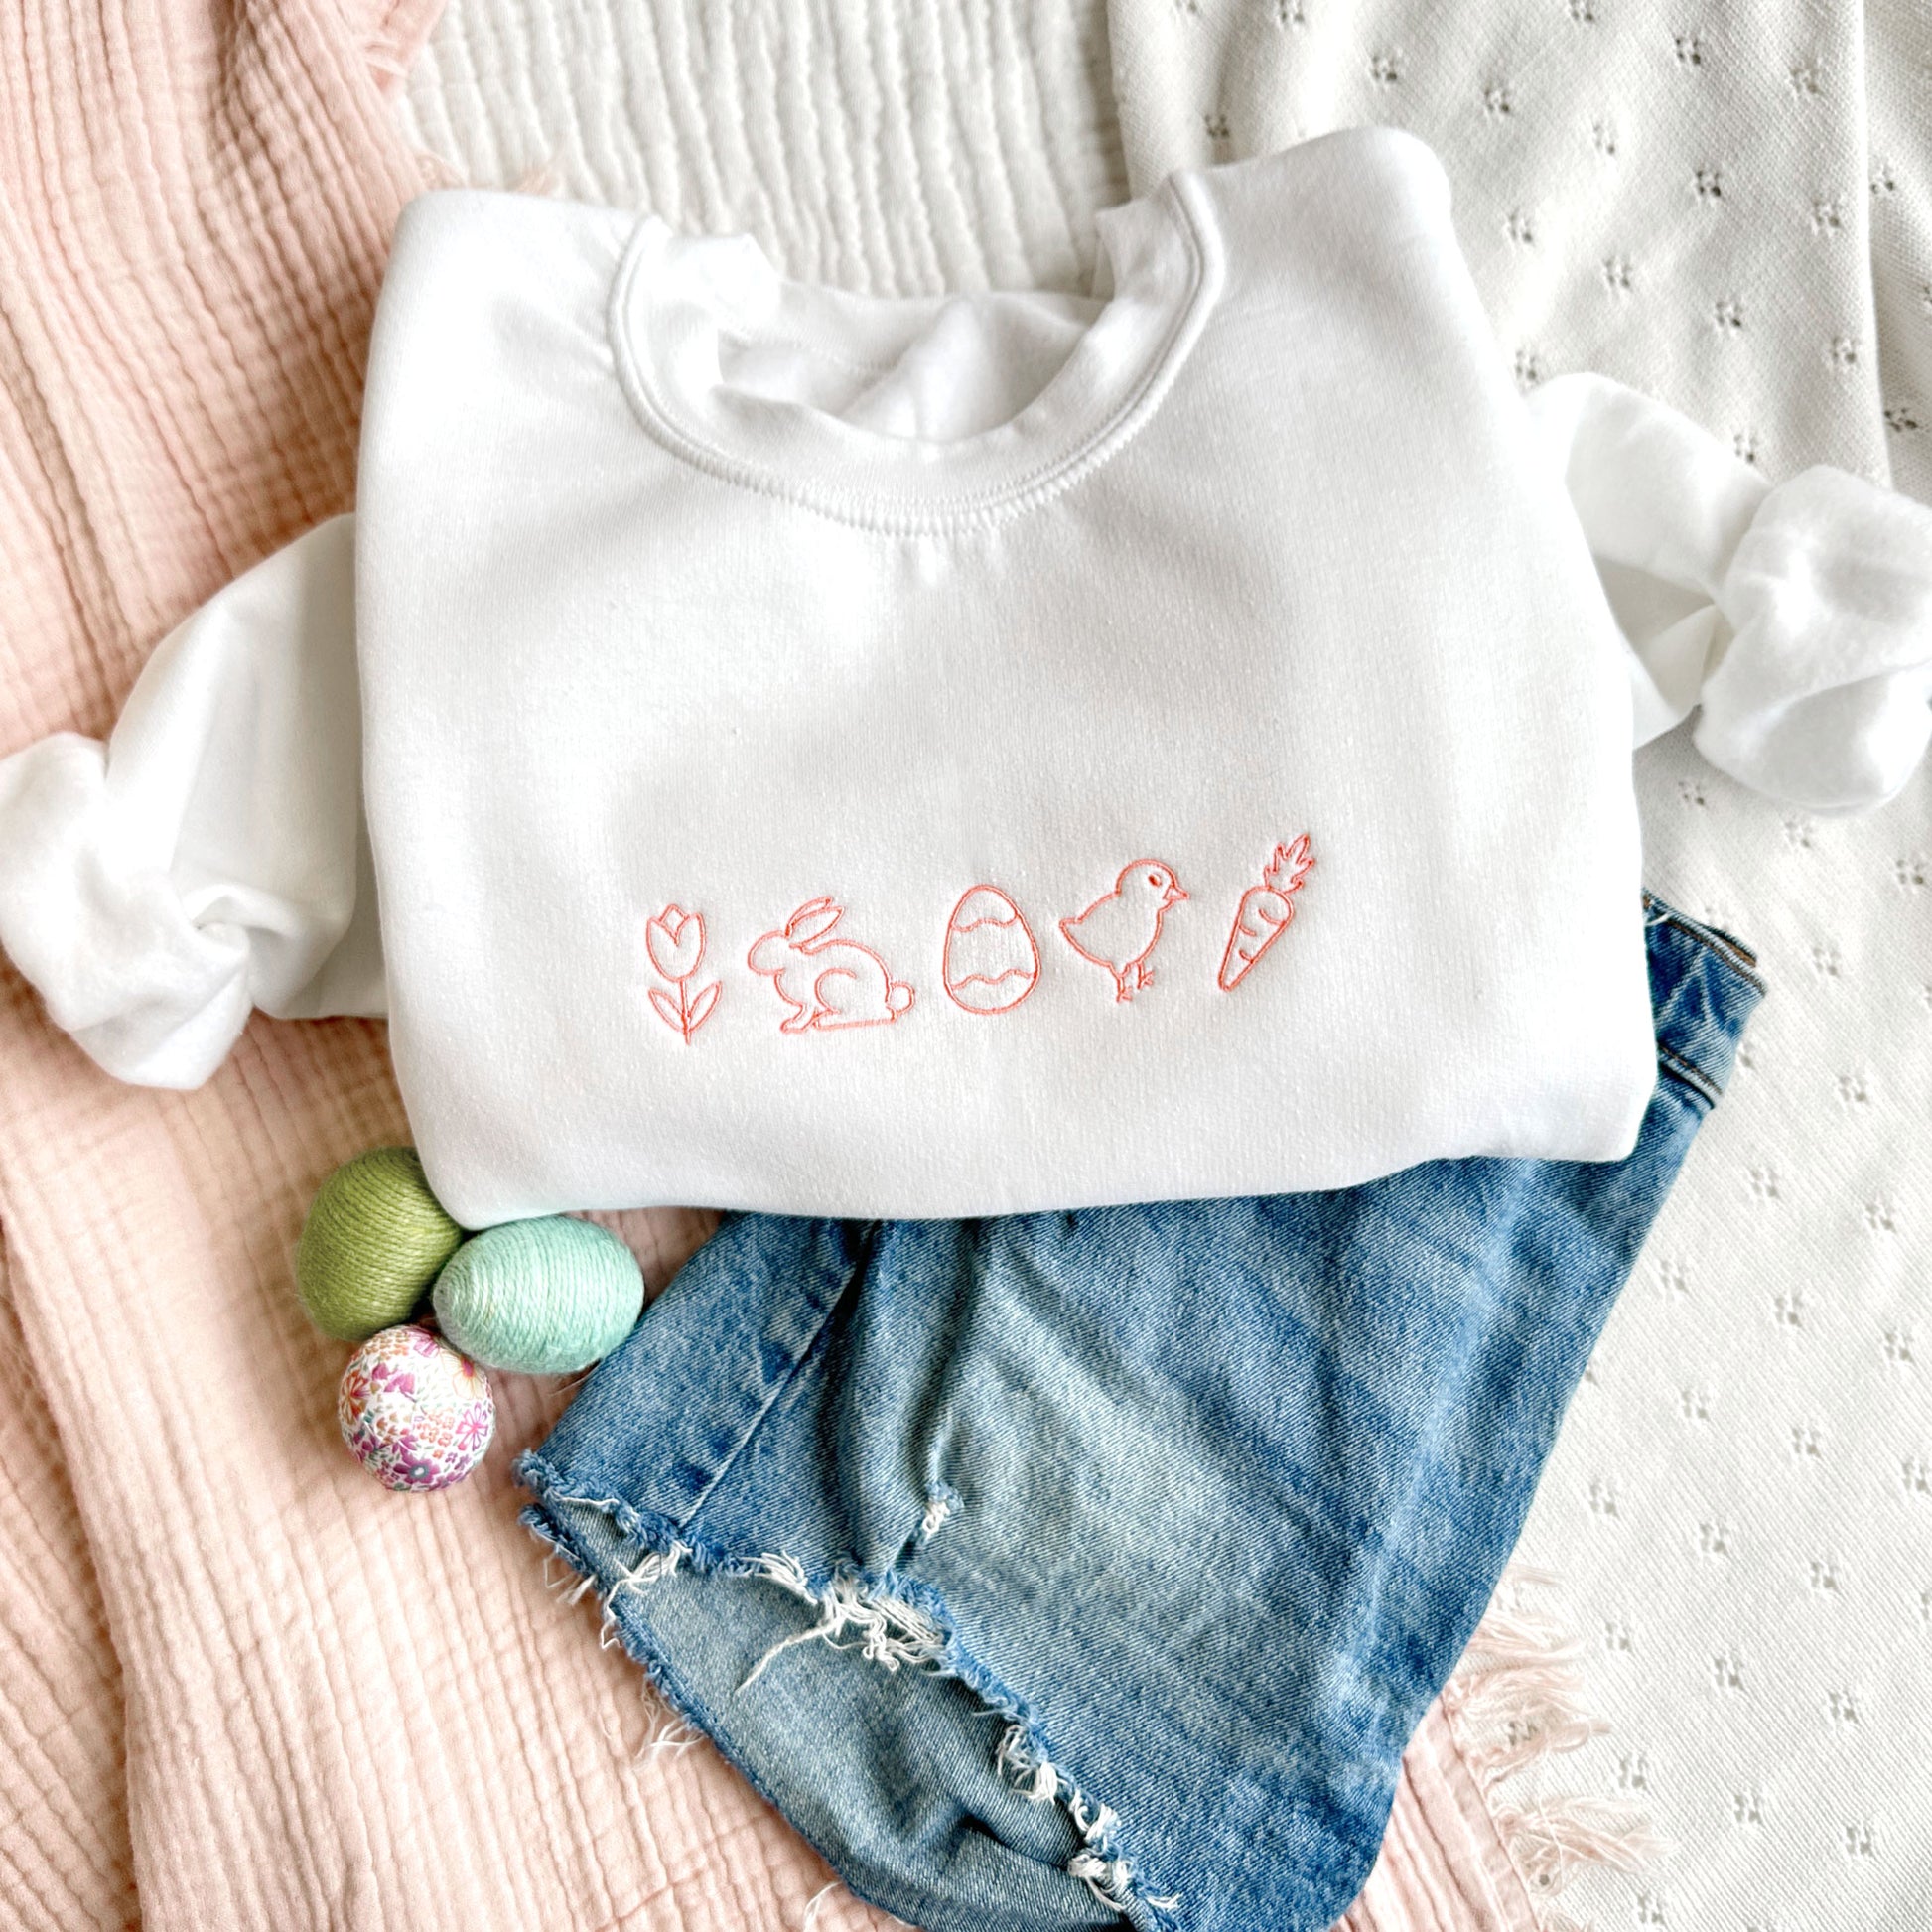 Styled flat lay of a white crewneck sweatshirt with playful easter icons embroidered in coral pink thread across the chest